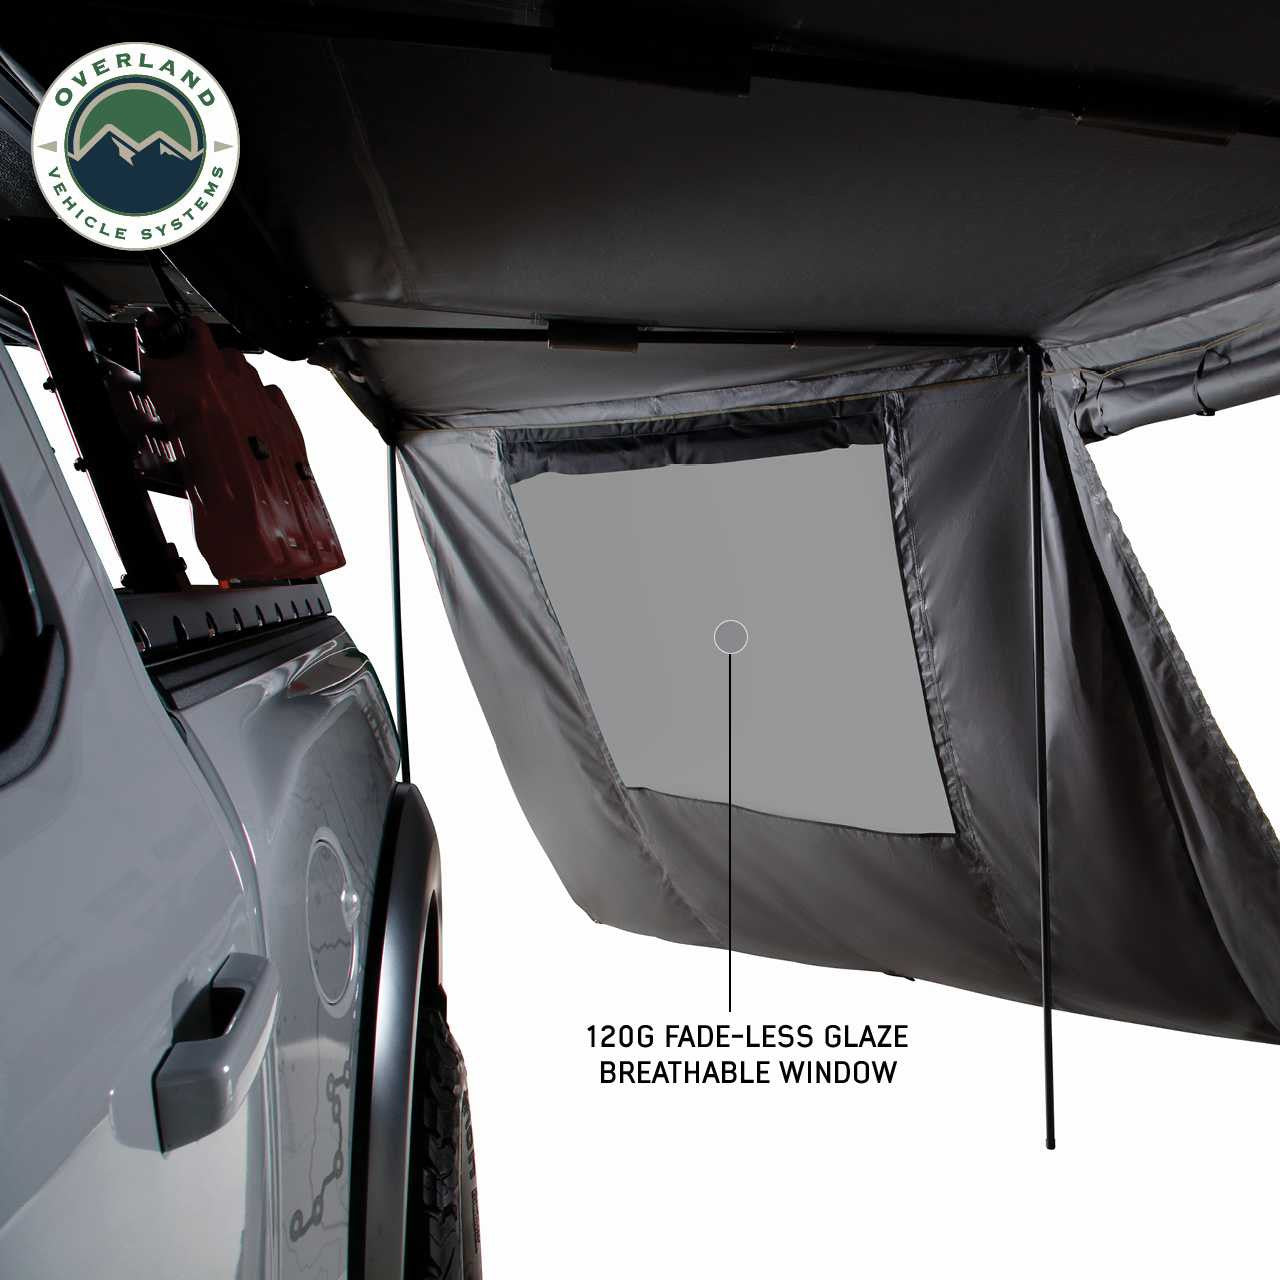 Overland Vehicle Systems Nomadic 180 LTE Awning Wall With Windows